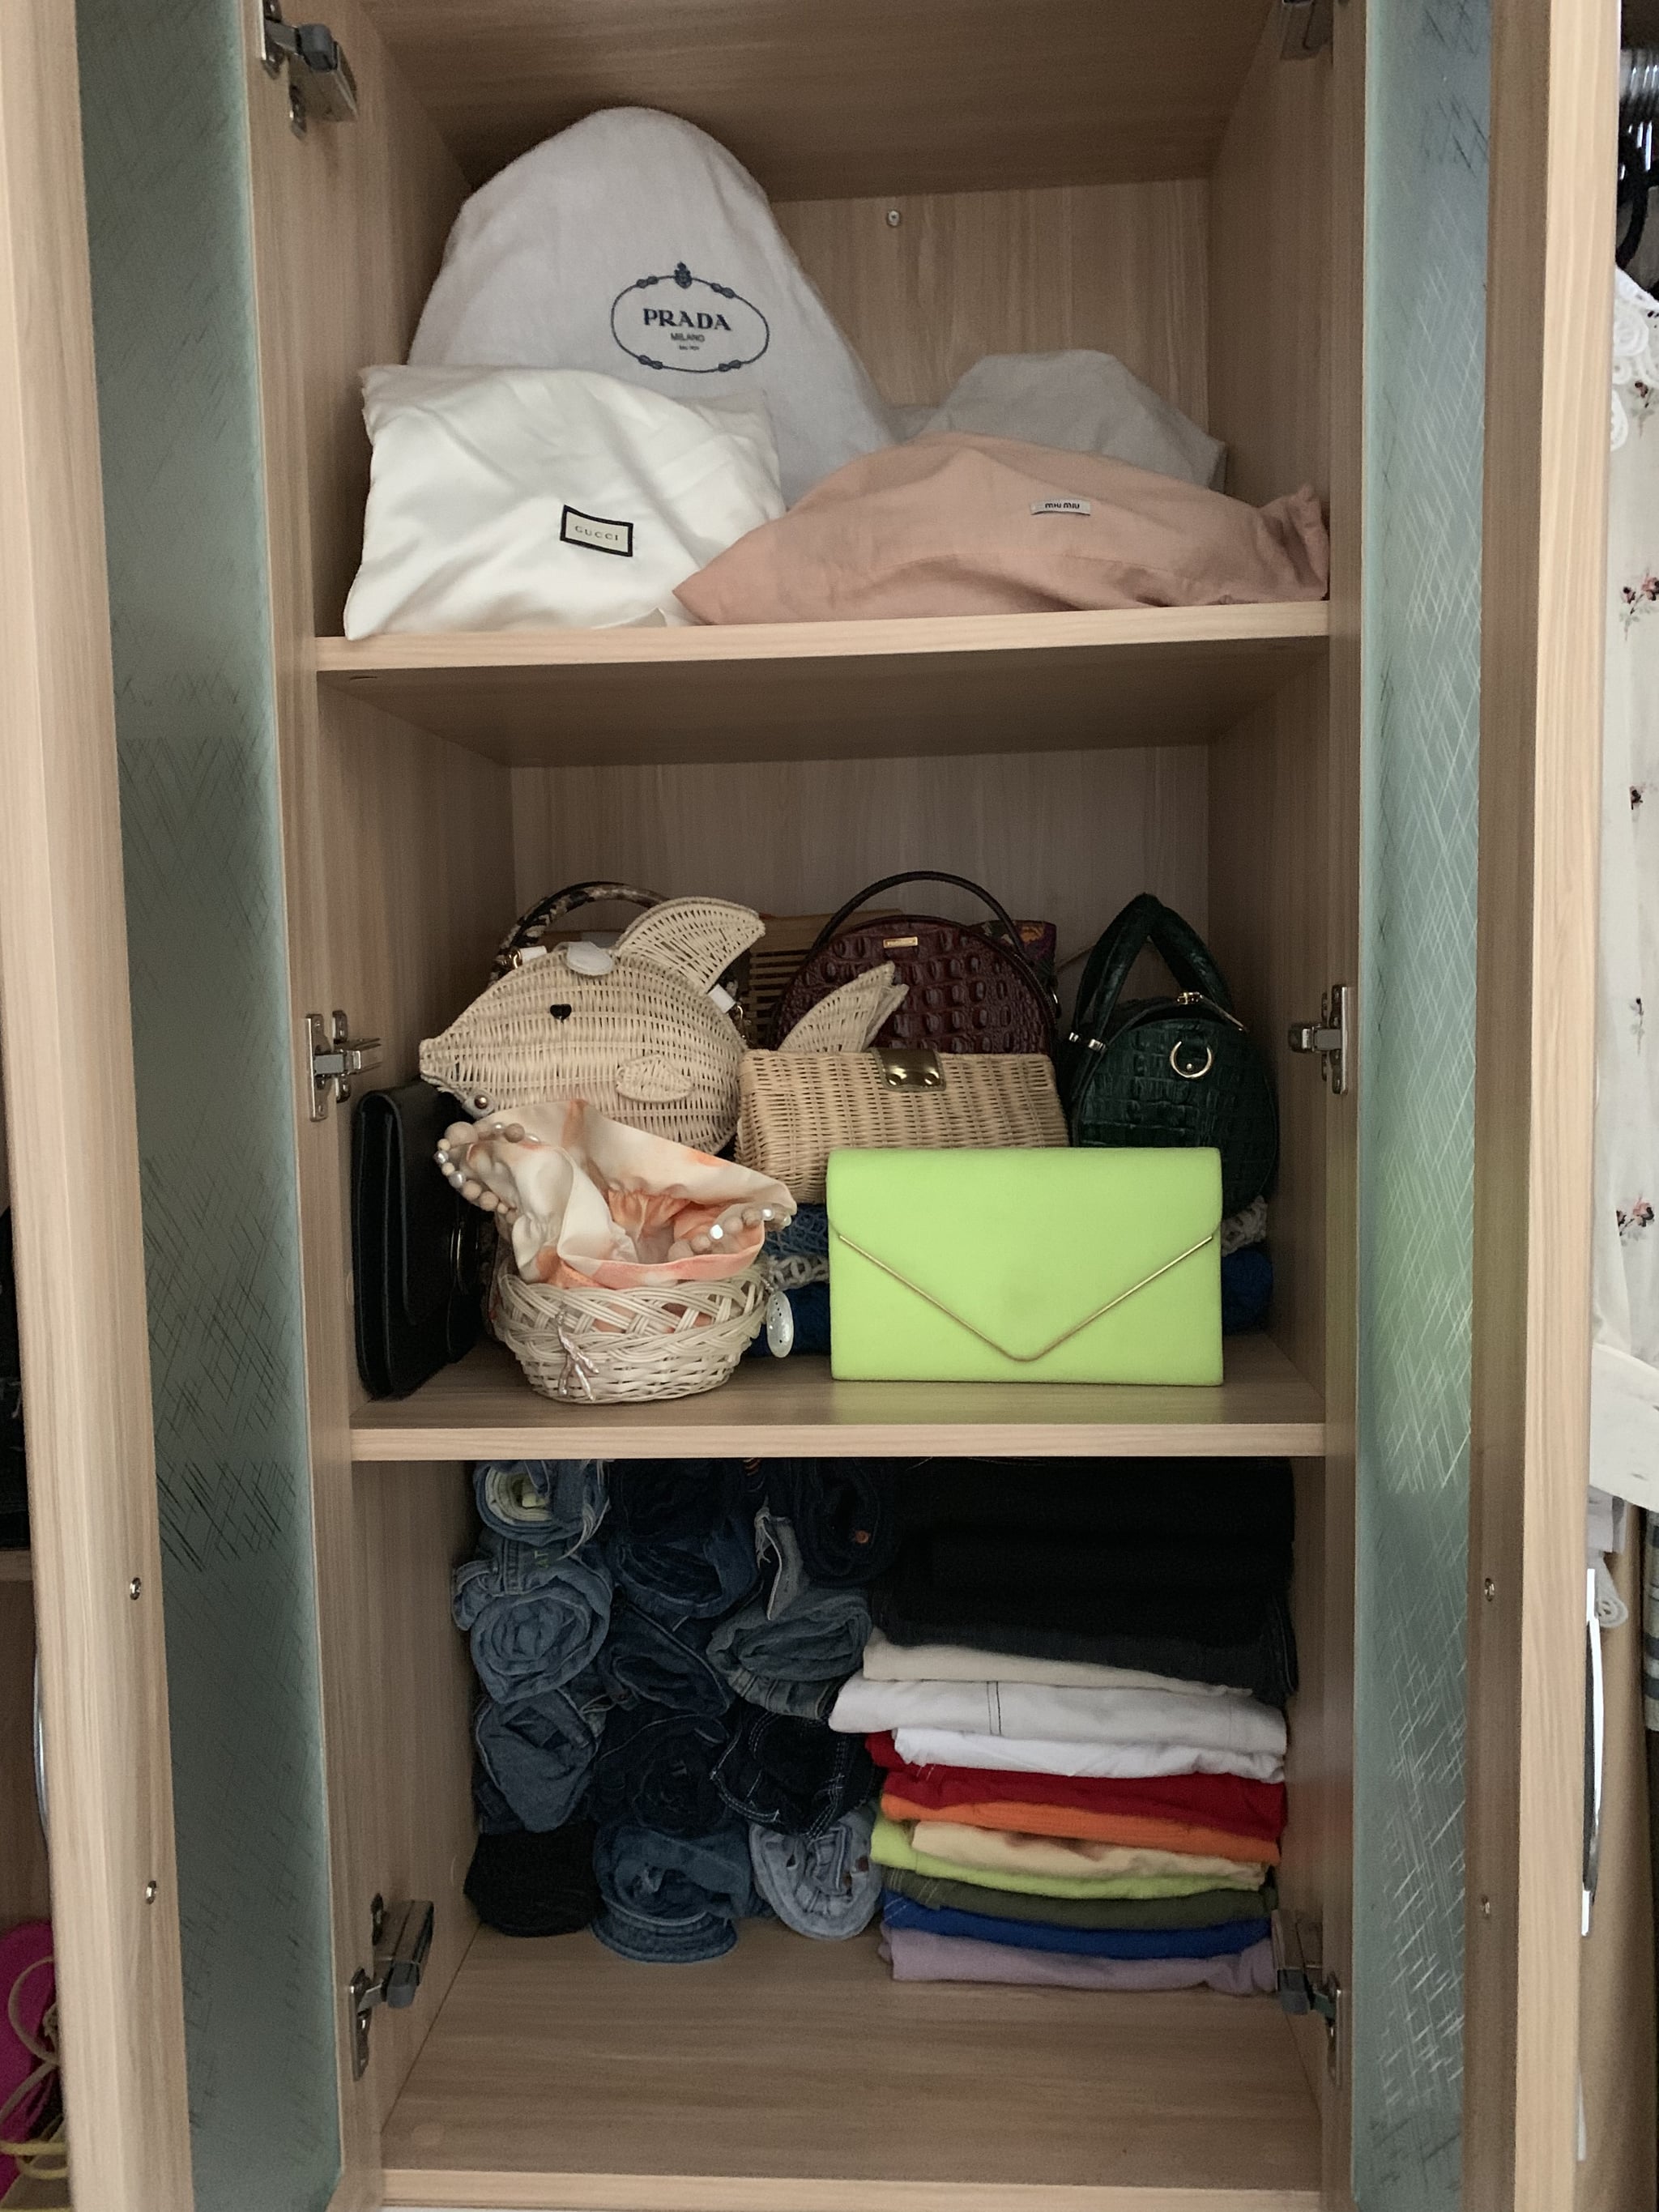 5 Steps for an Easy Closet Clean-Out